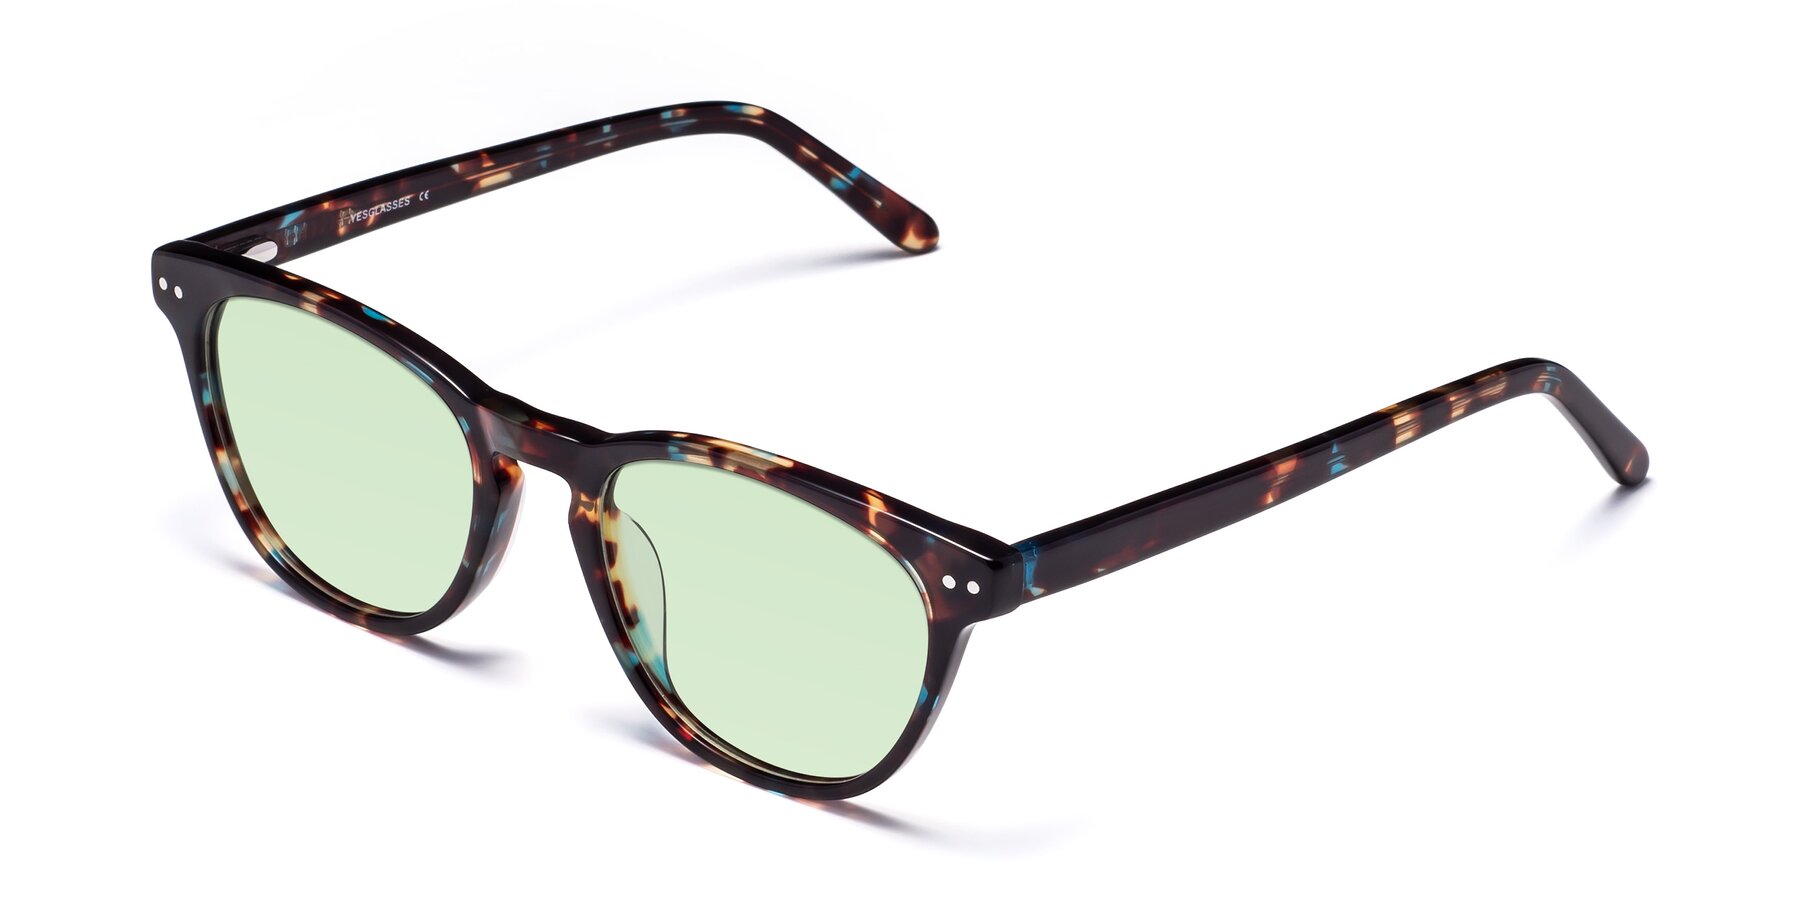 Angle of Blaze in Floral Tortoise with Light Green Tinted Lenses